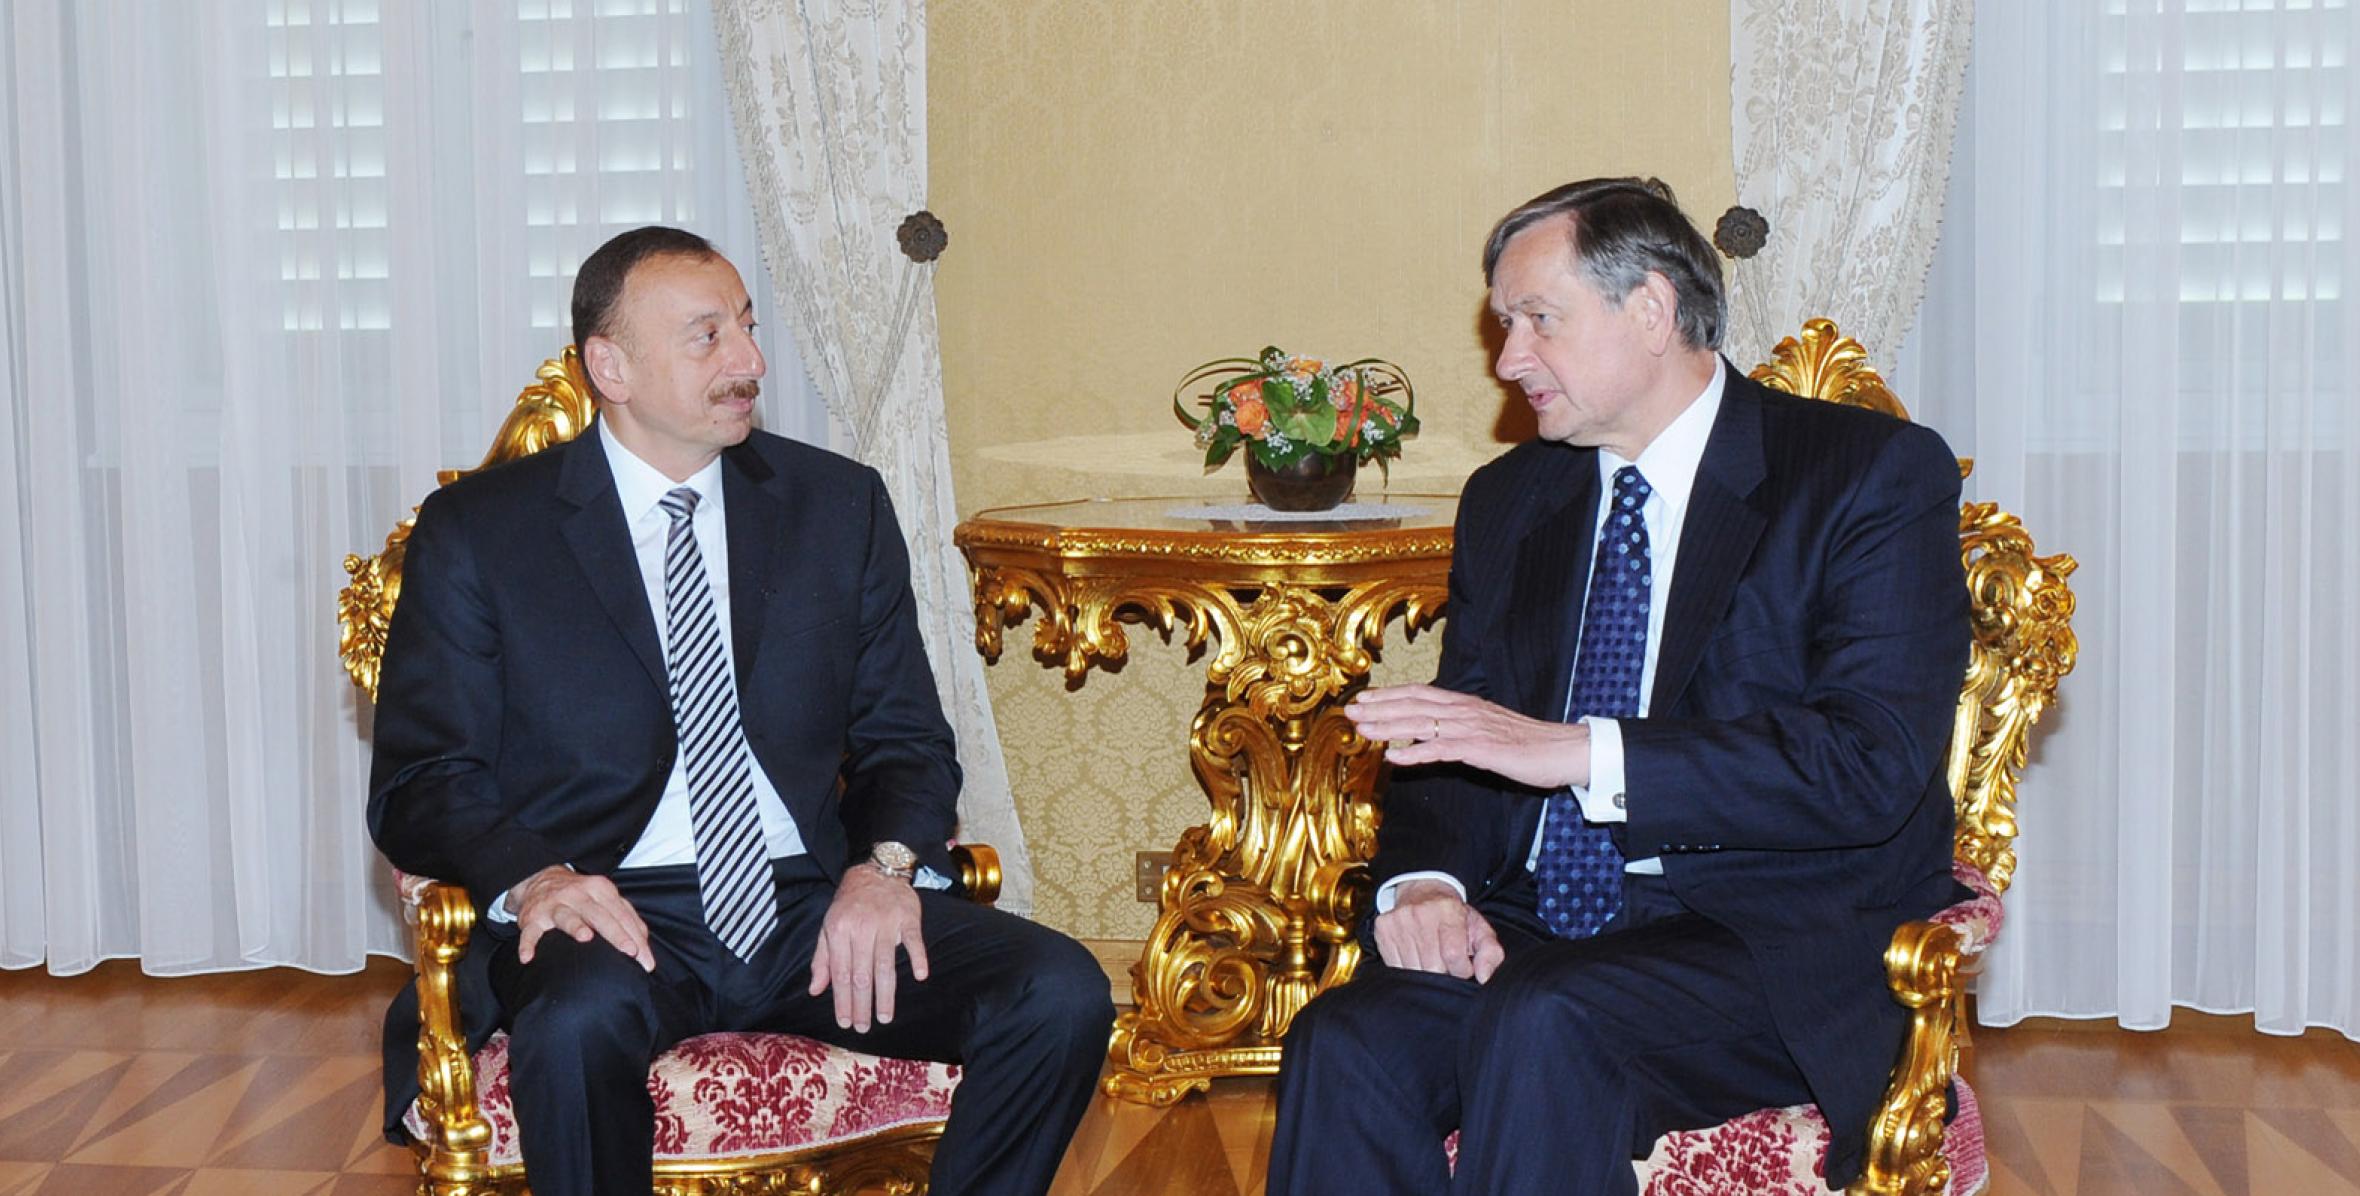 Ilham Aliyev and Slovenian President Danilo Türk had a face-to-face meeting